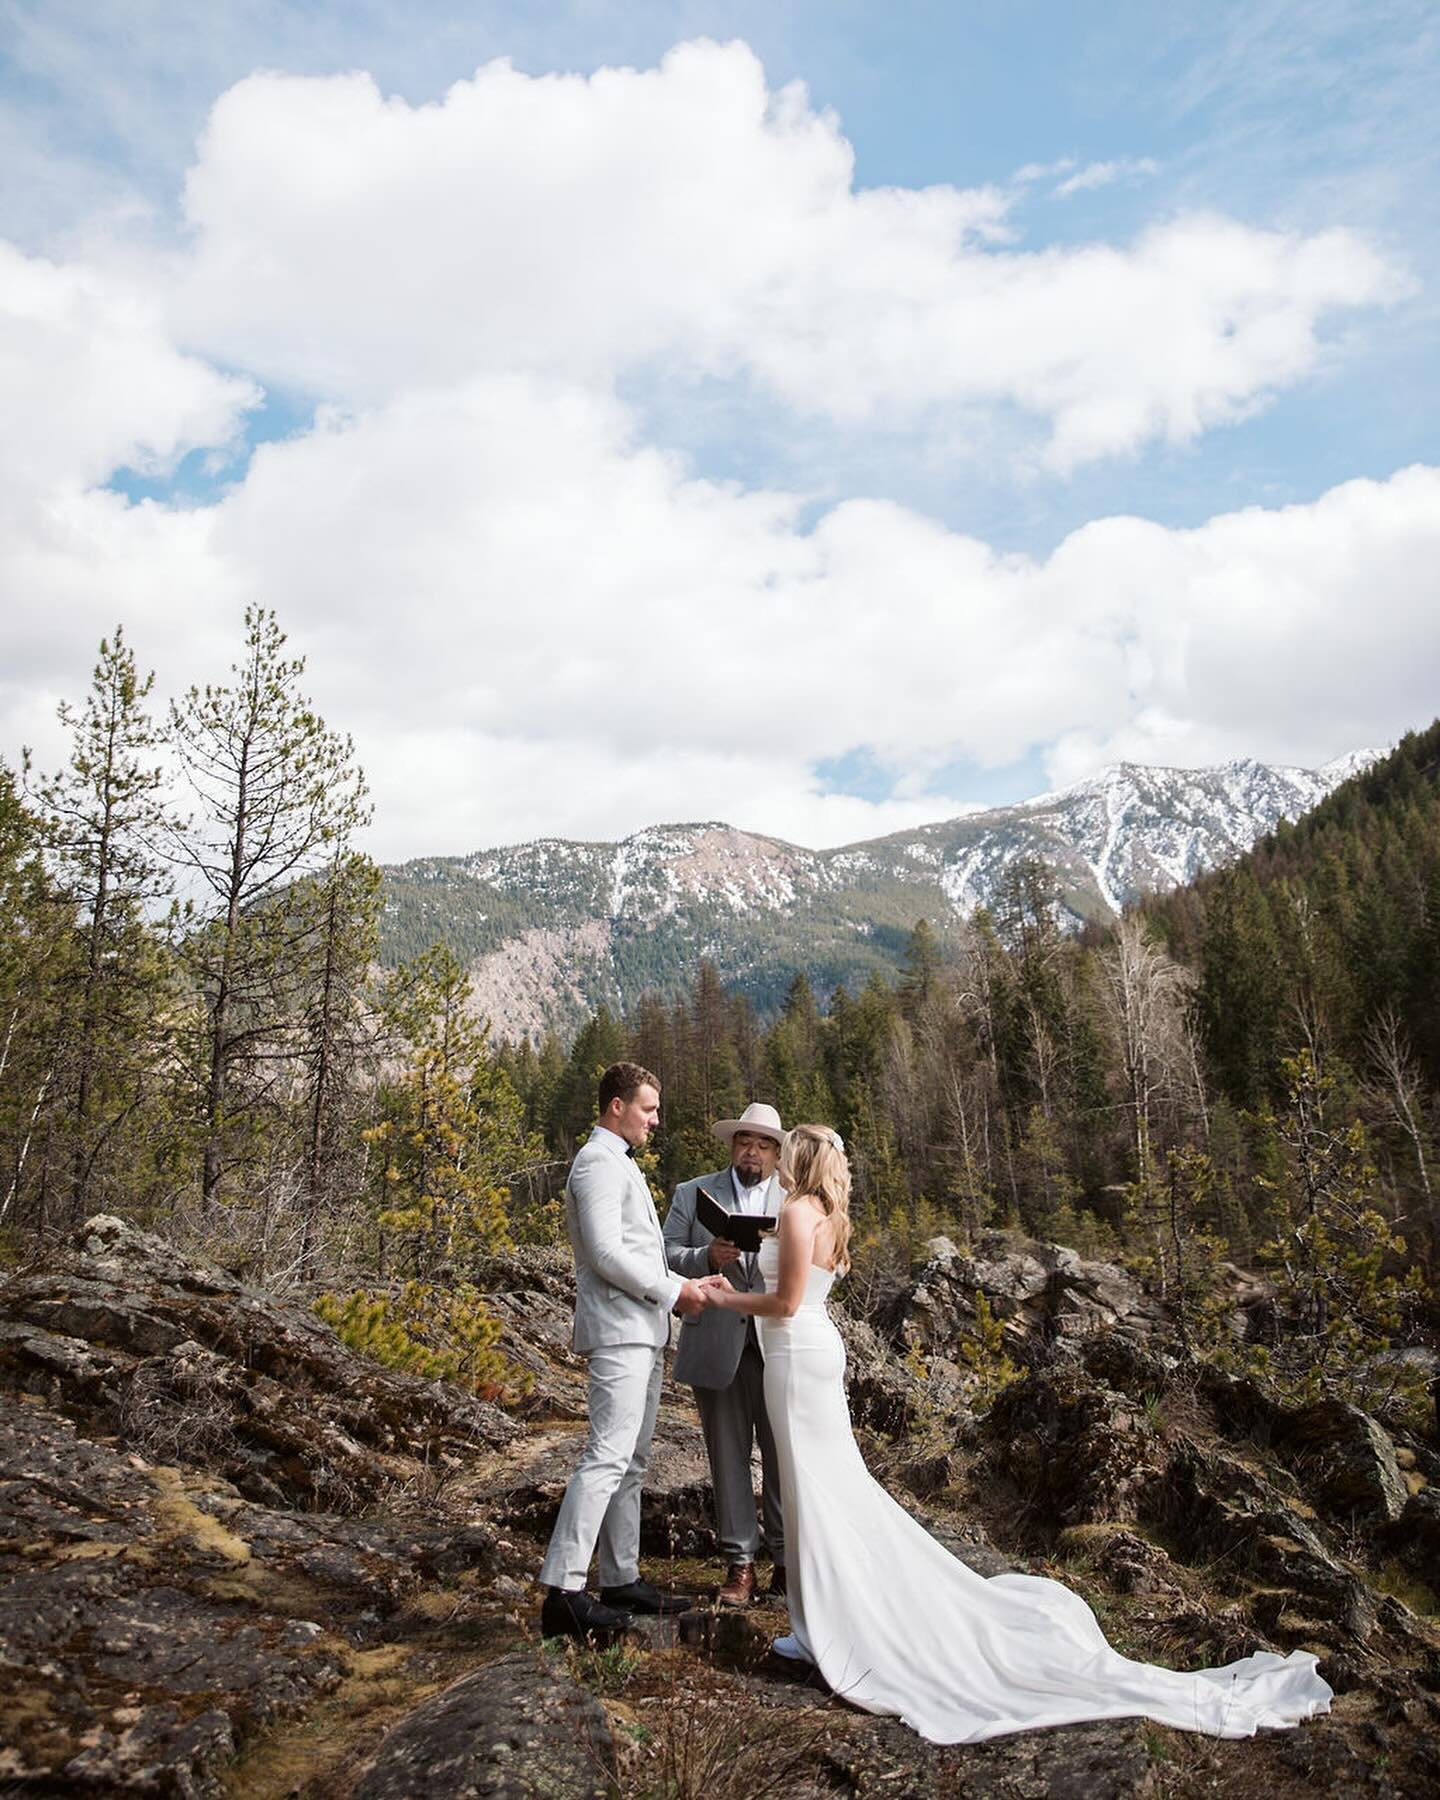 An elopement in Montana, in April. 😍🙌🏻🥰
-
When you come to Montana in April, you never know what you are going to get. Maddie and Gage were amazing dealing with snow the morning of their wedding, wicked winds, and temps that had these Georgia fol